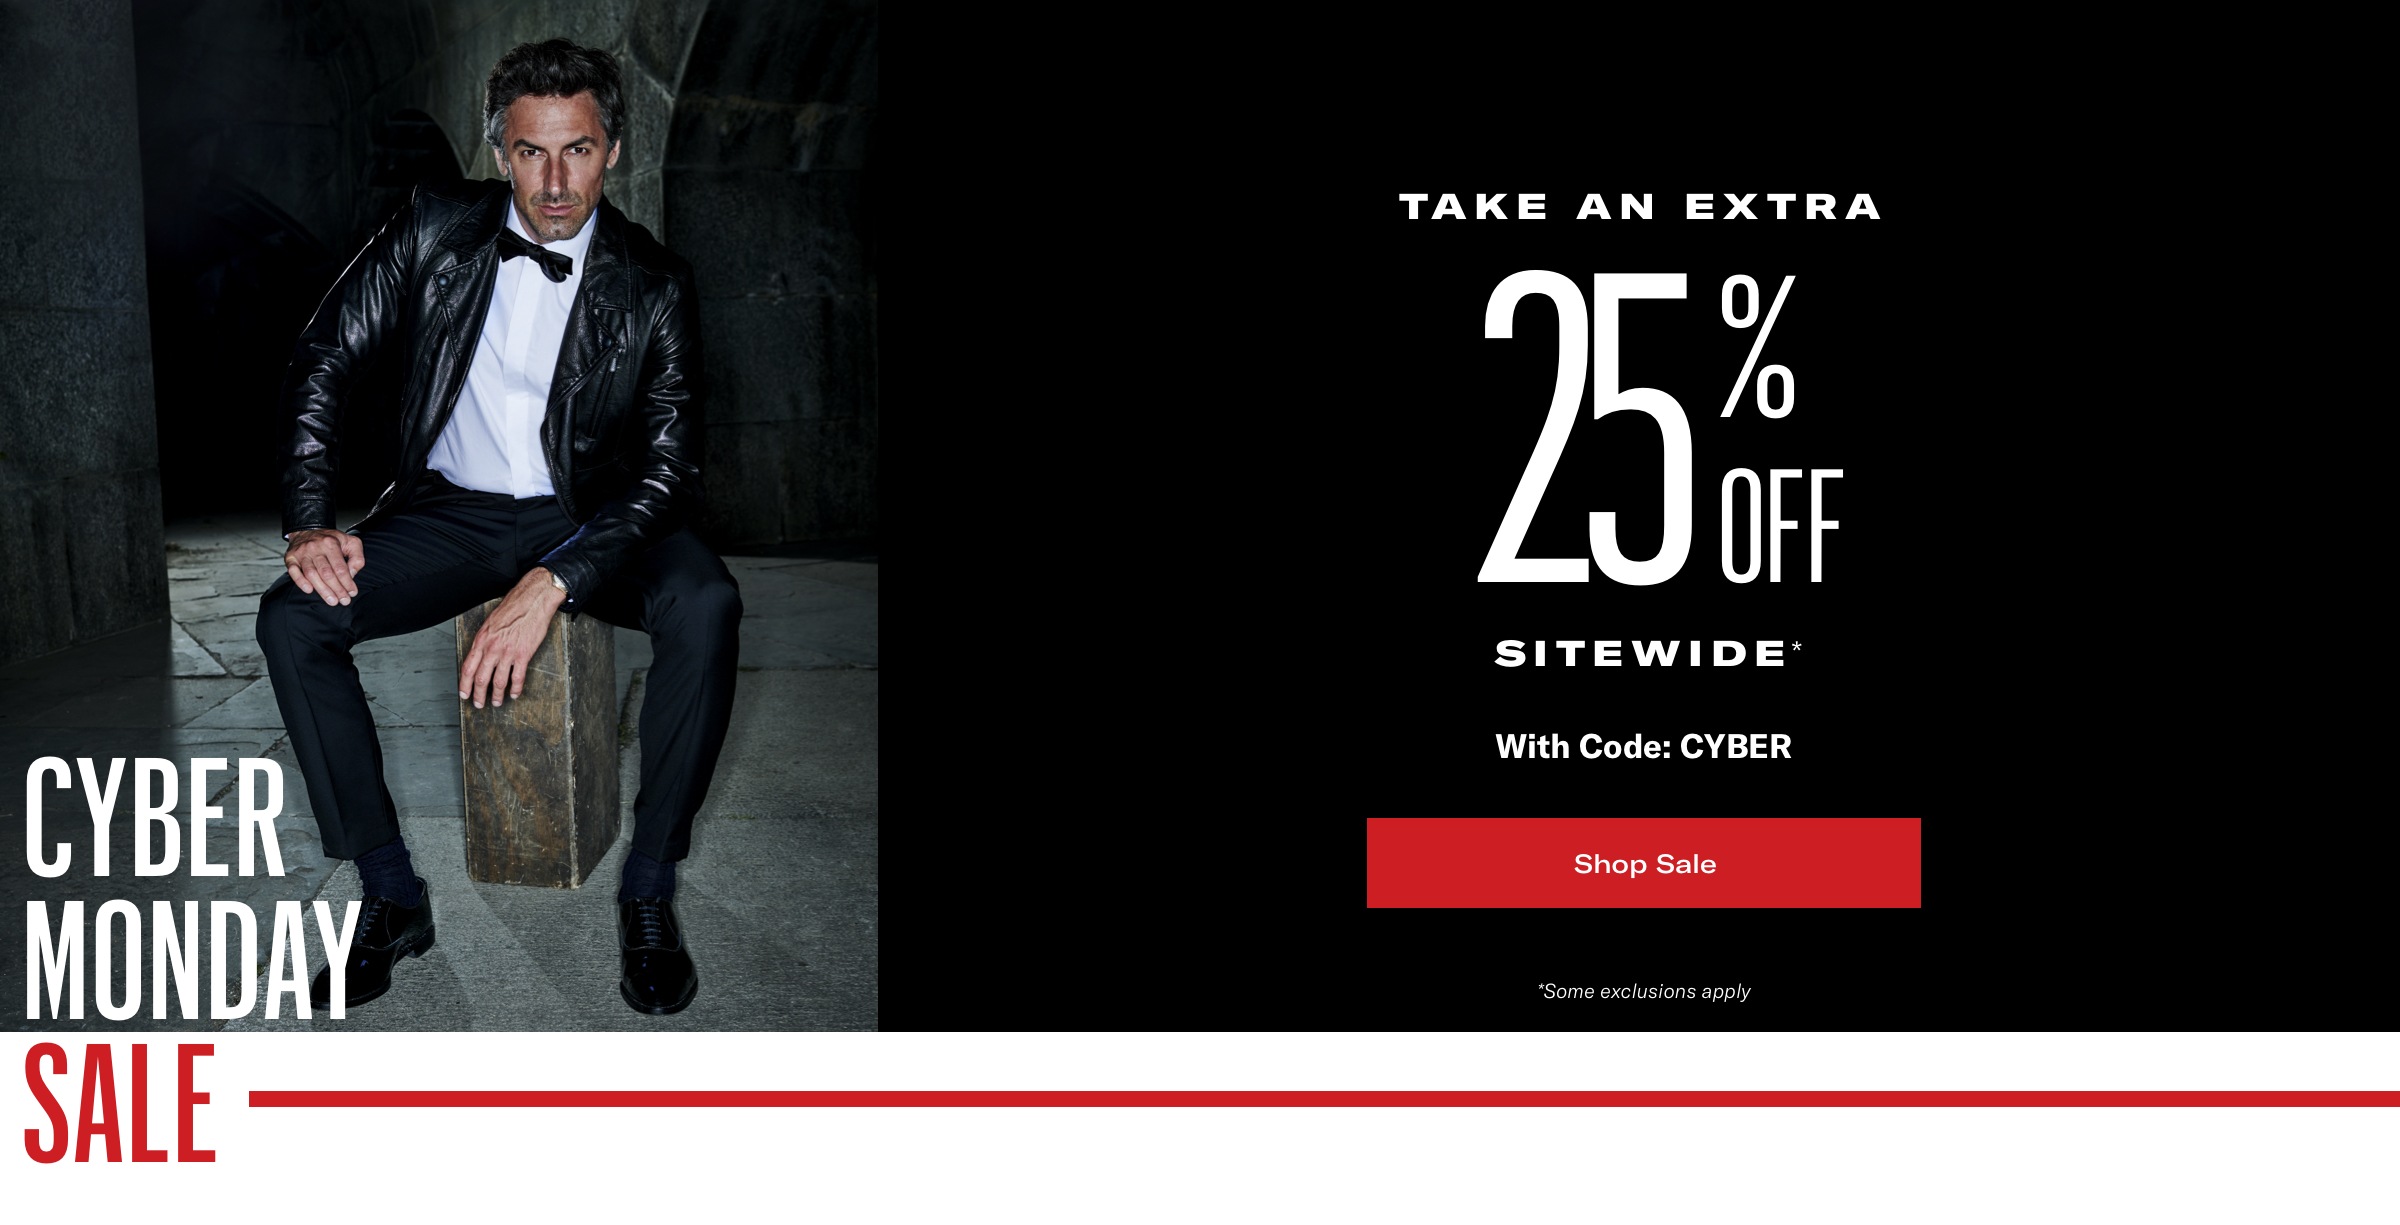 Extra 25% off Sitewide with code CYBER